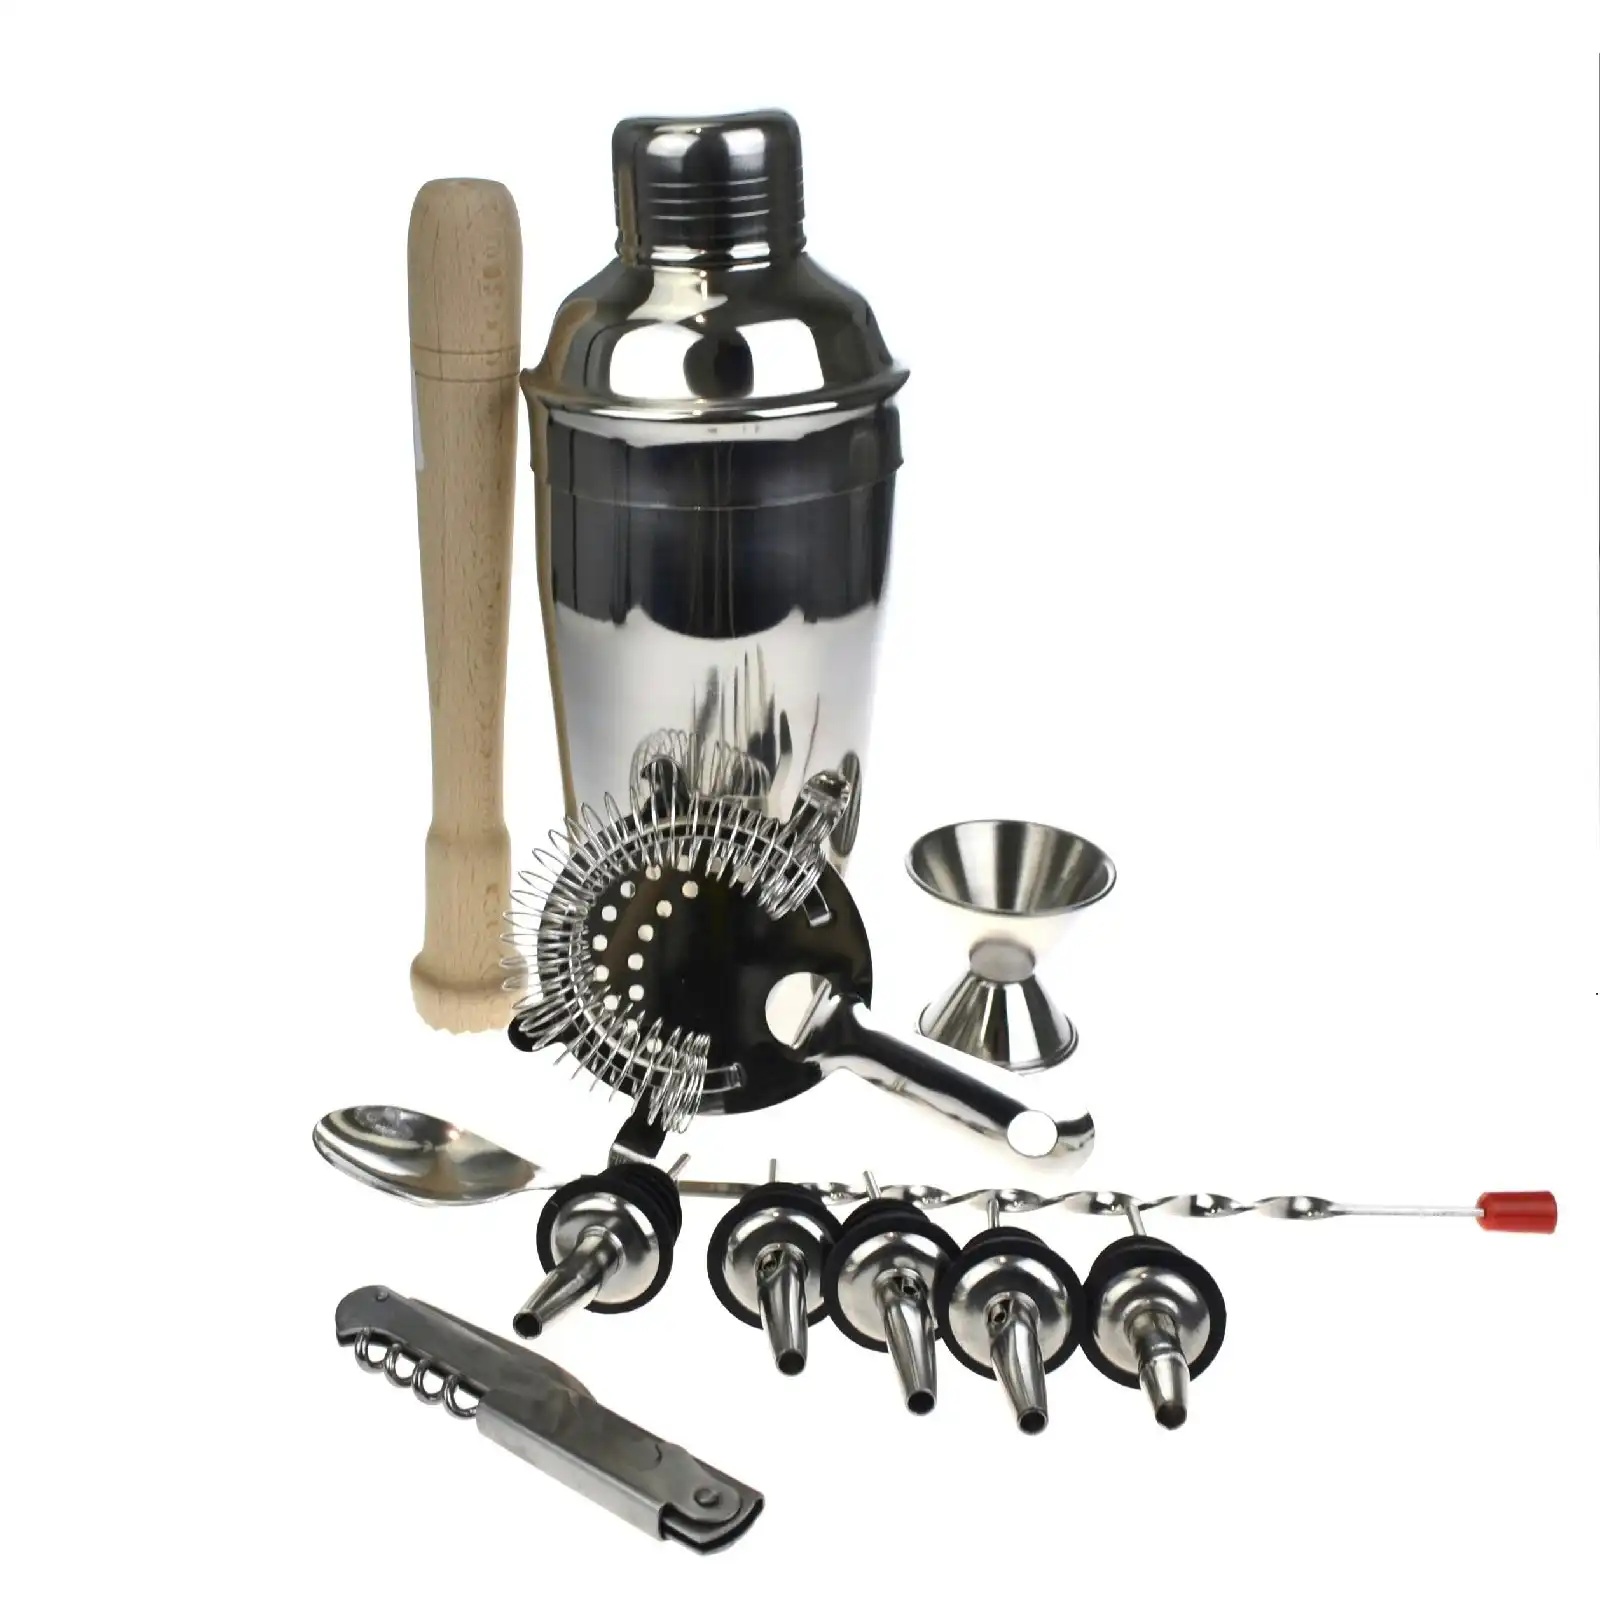 Deluxe 10 Piece Cocktail Shaker Set   With Free Waiters Friend